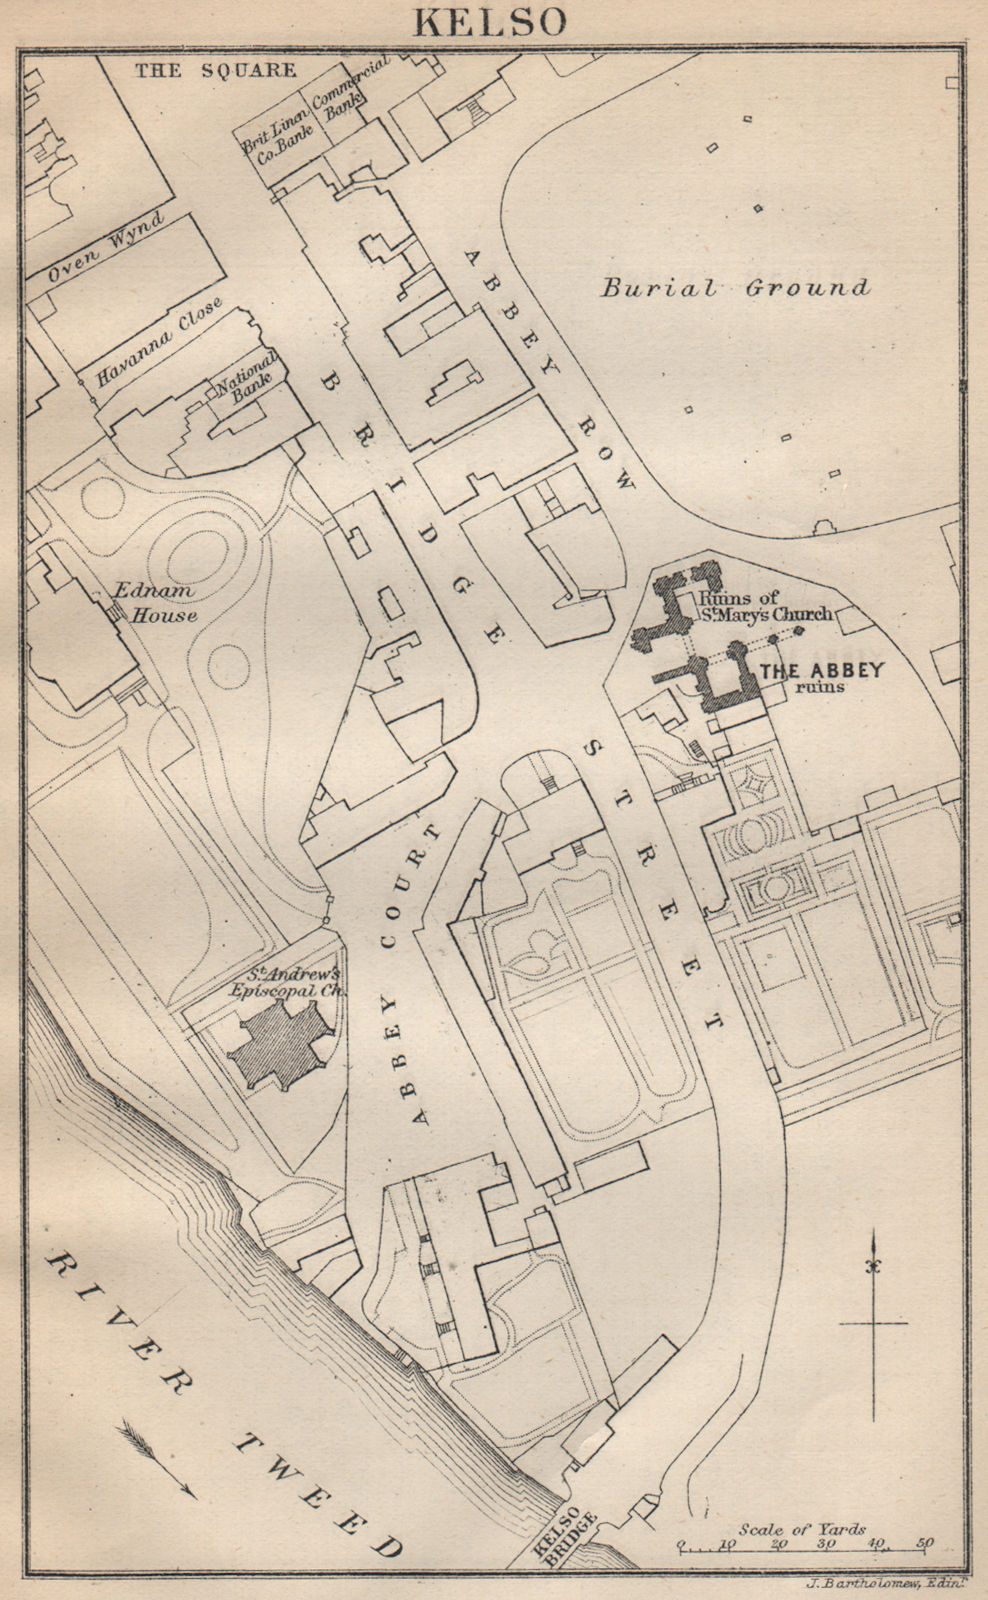 Associate Product KELSO abbey ground plan & town plan. Scottish Borders 1886 old antique map